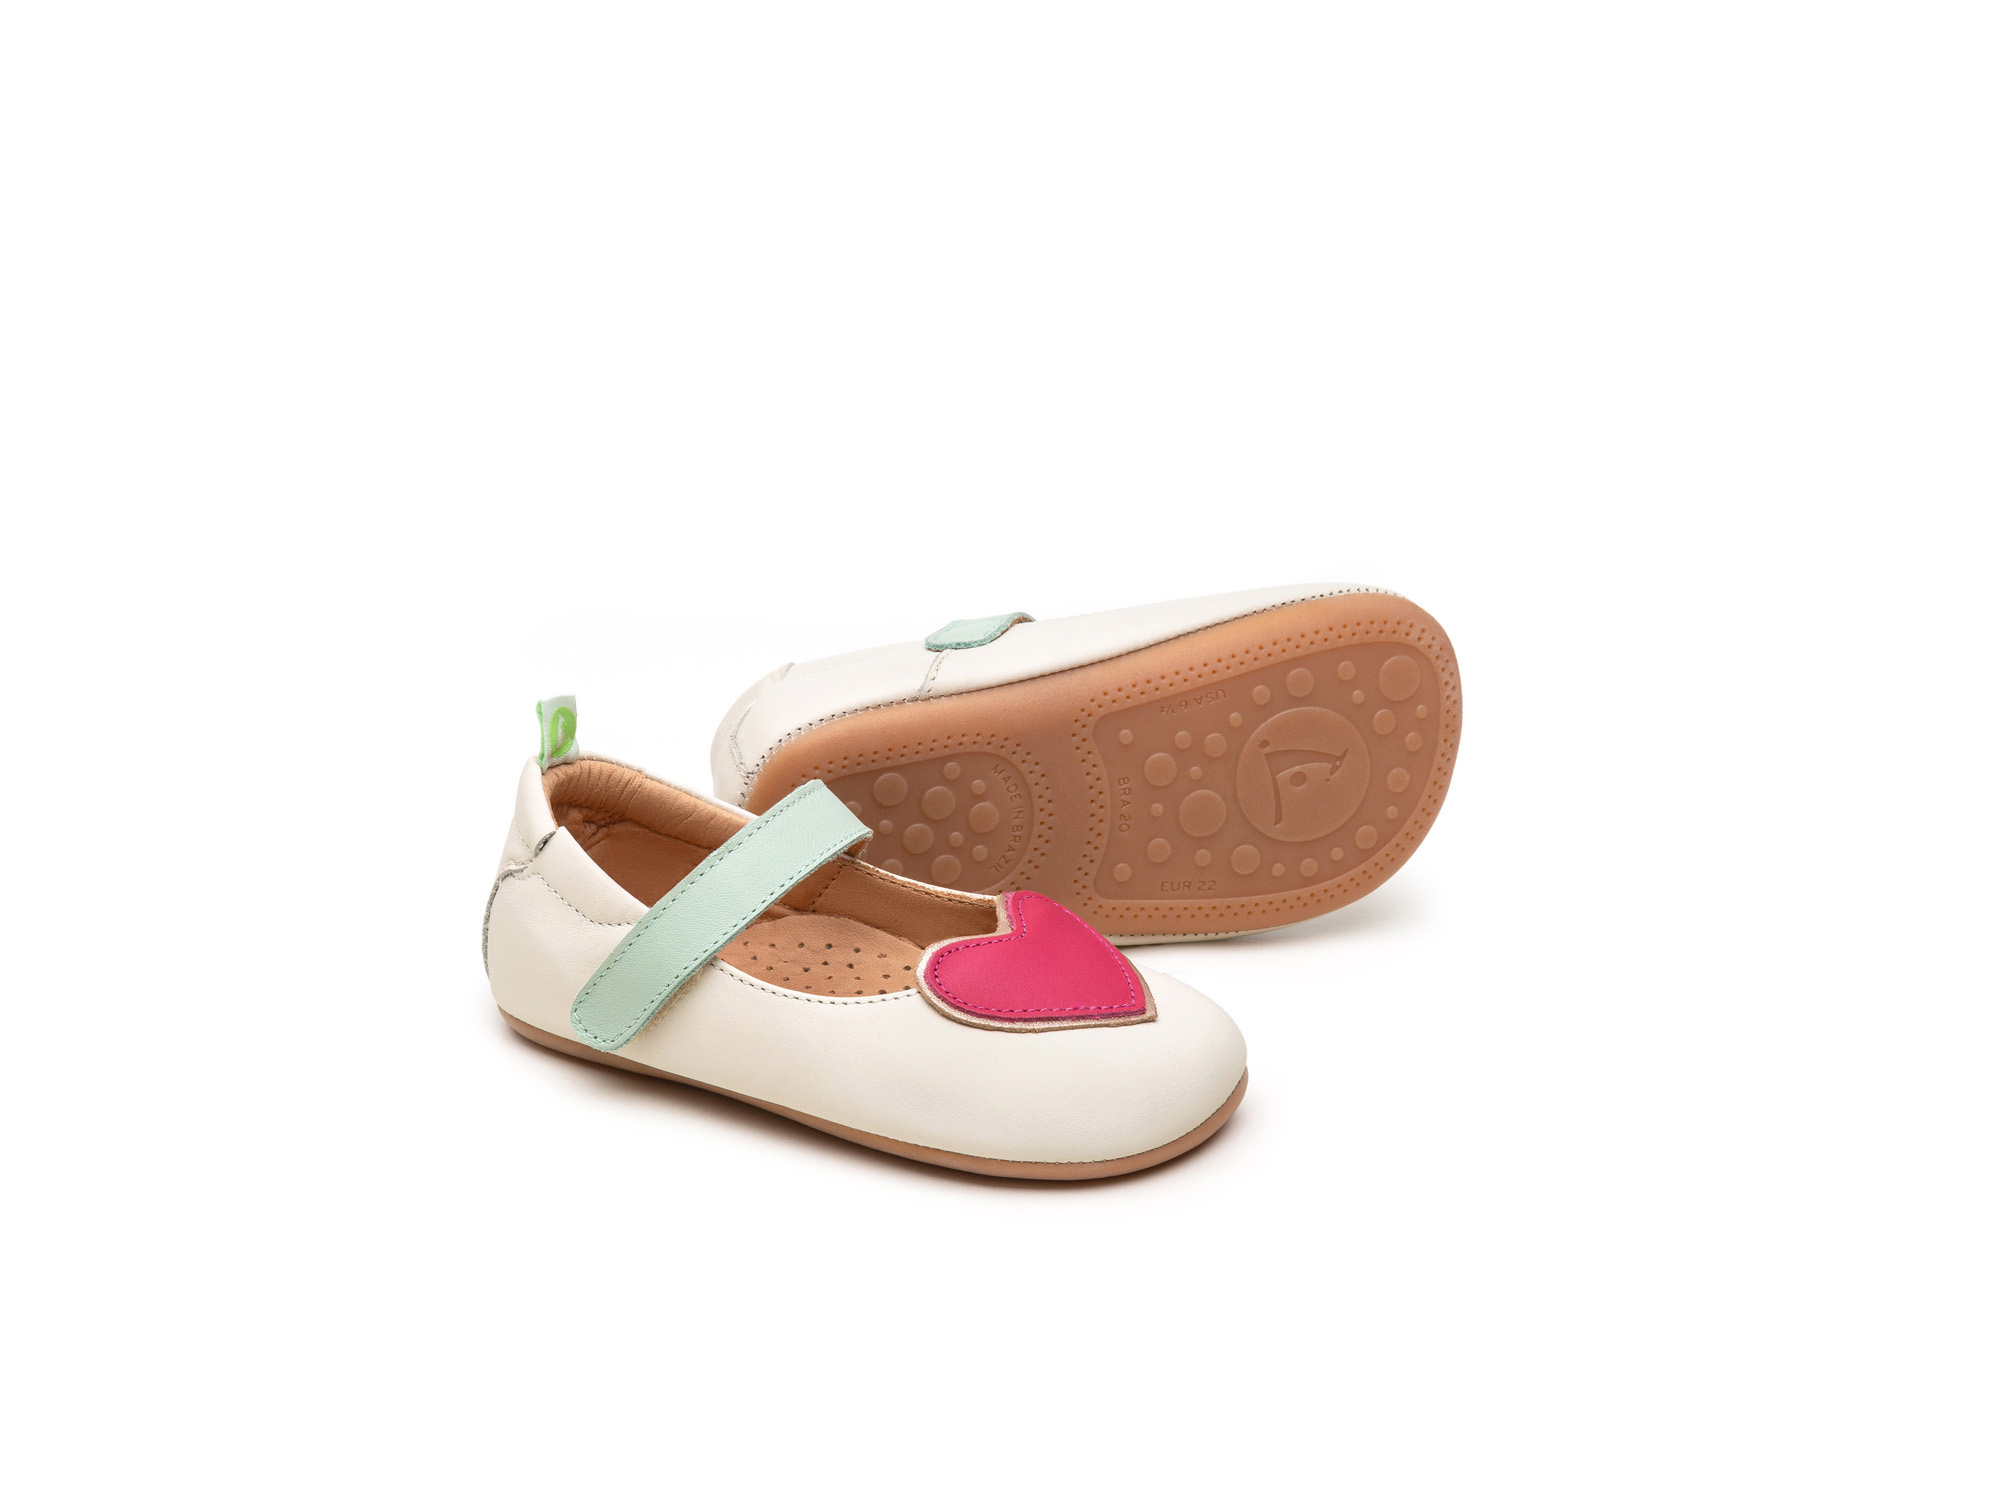 UP & GO Mary Janes for Girls Hearty | Tip Toey Joey - Australia - 0